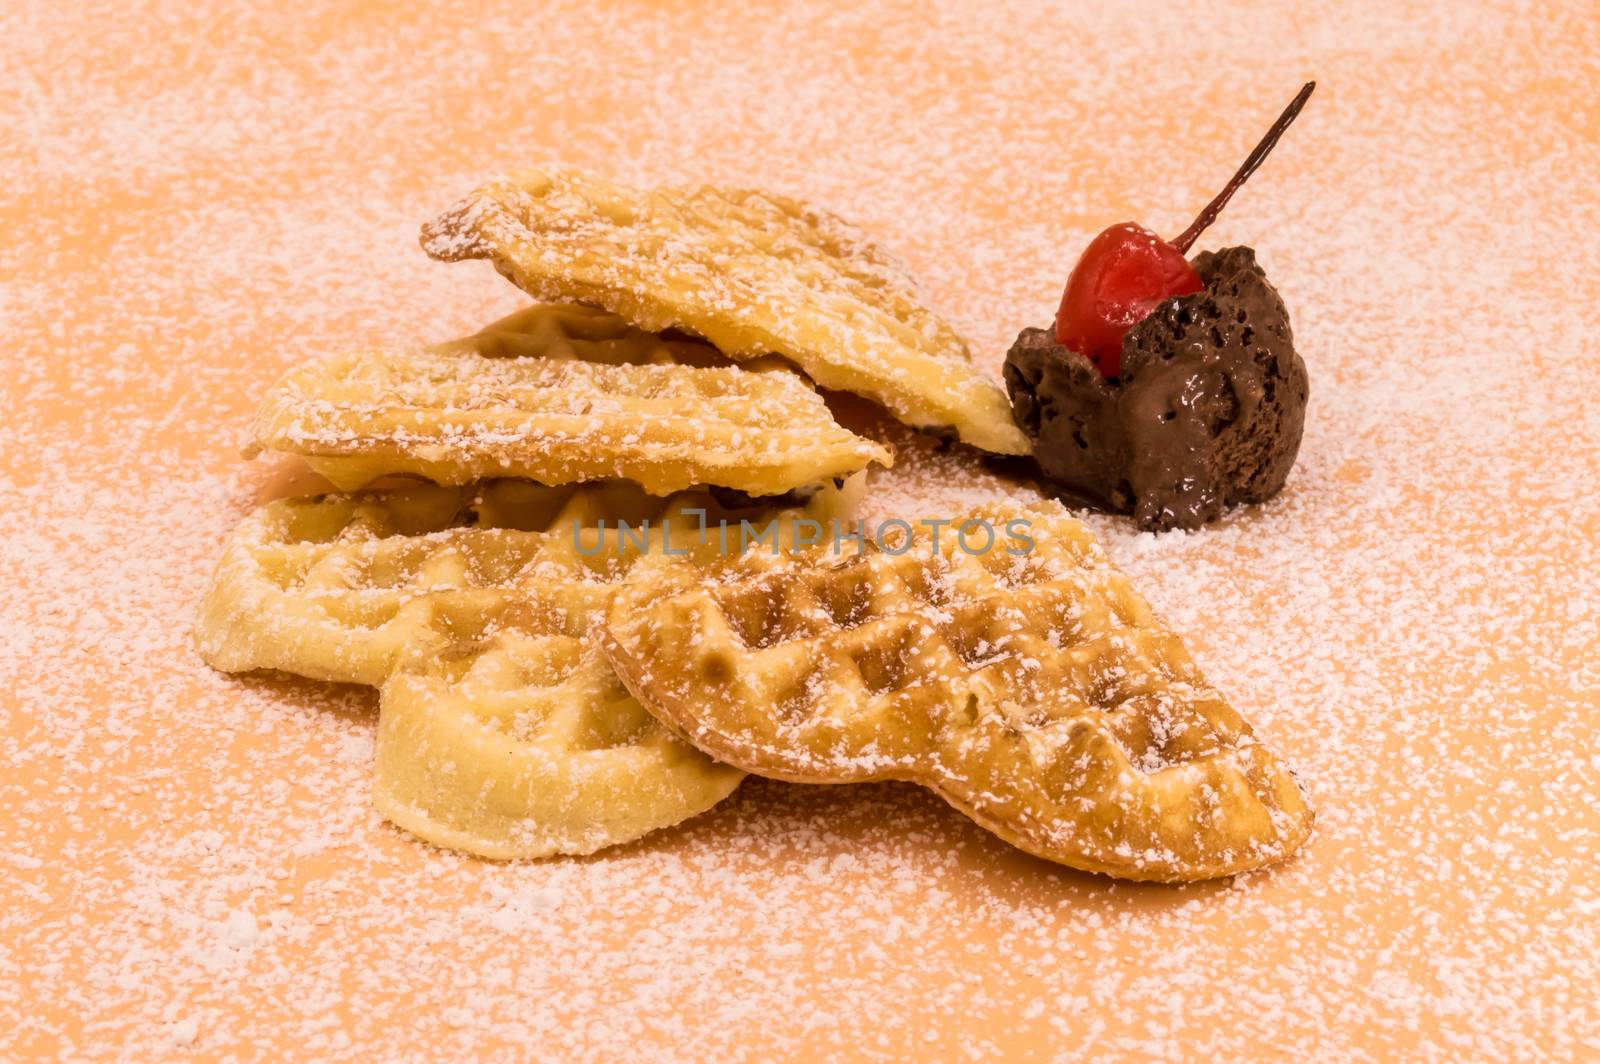 Triangle of homemade waffles with powdered sugar, a scoop of cho by Philou1000